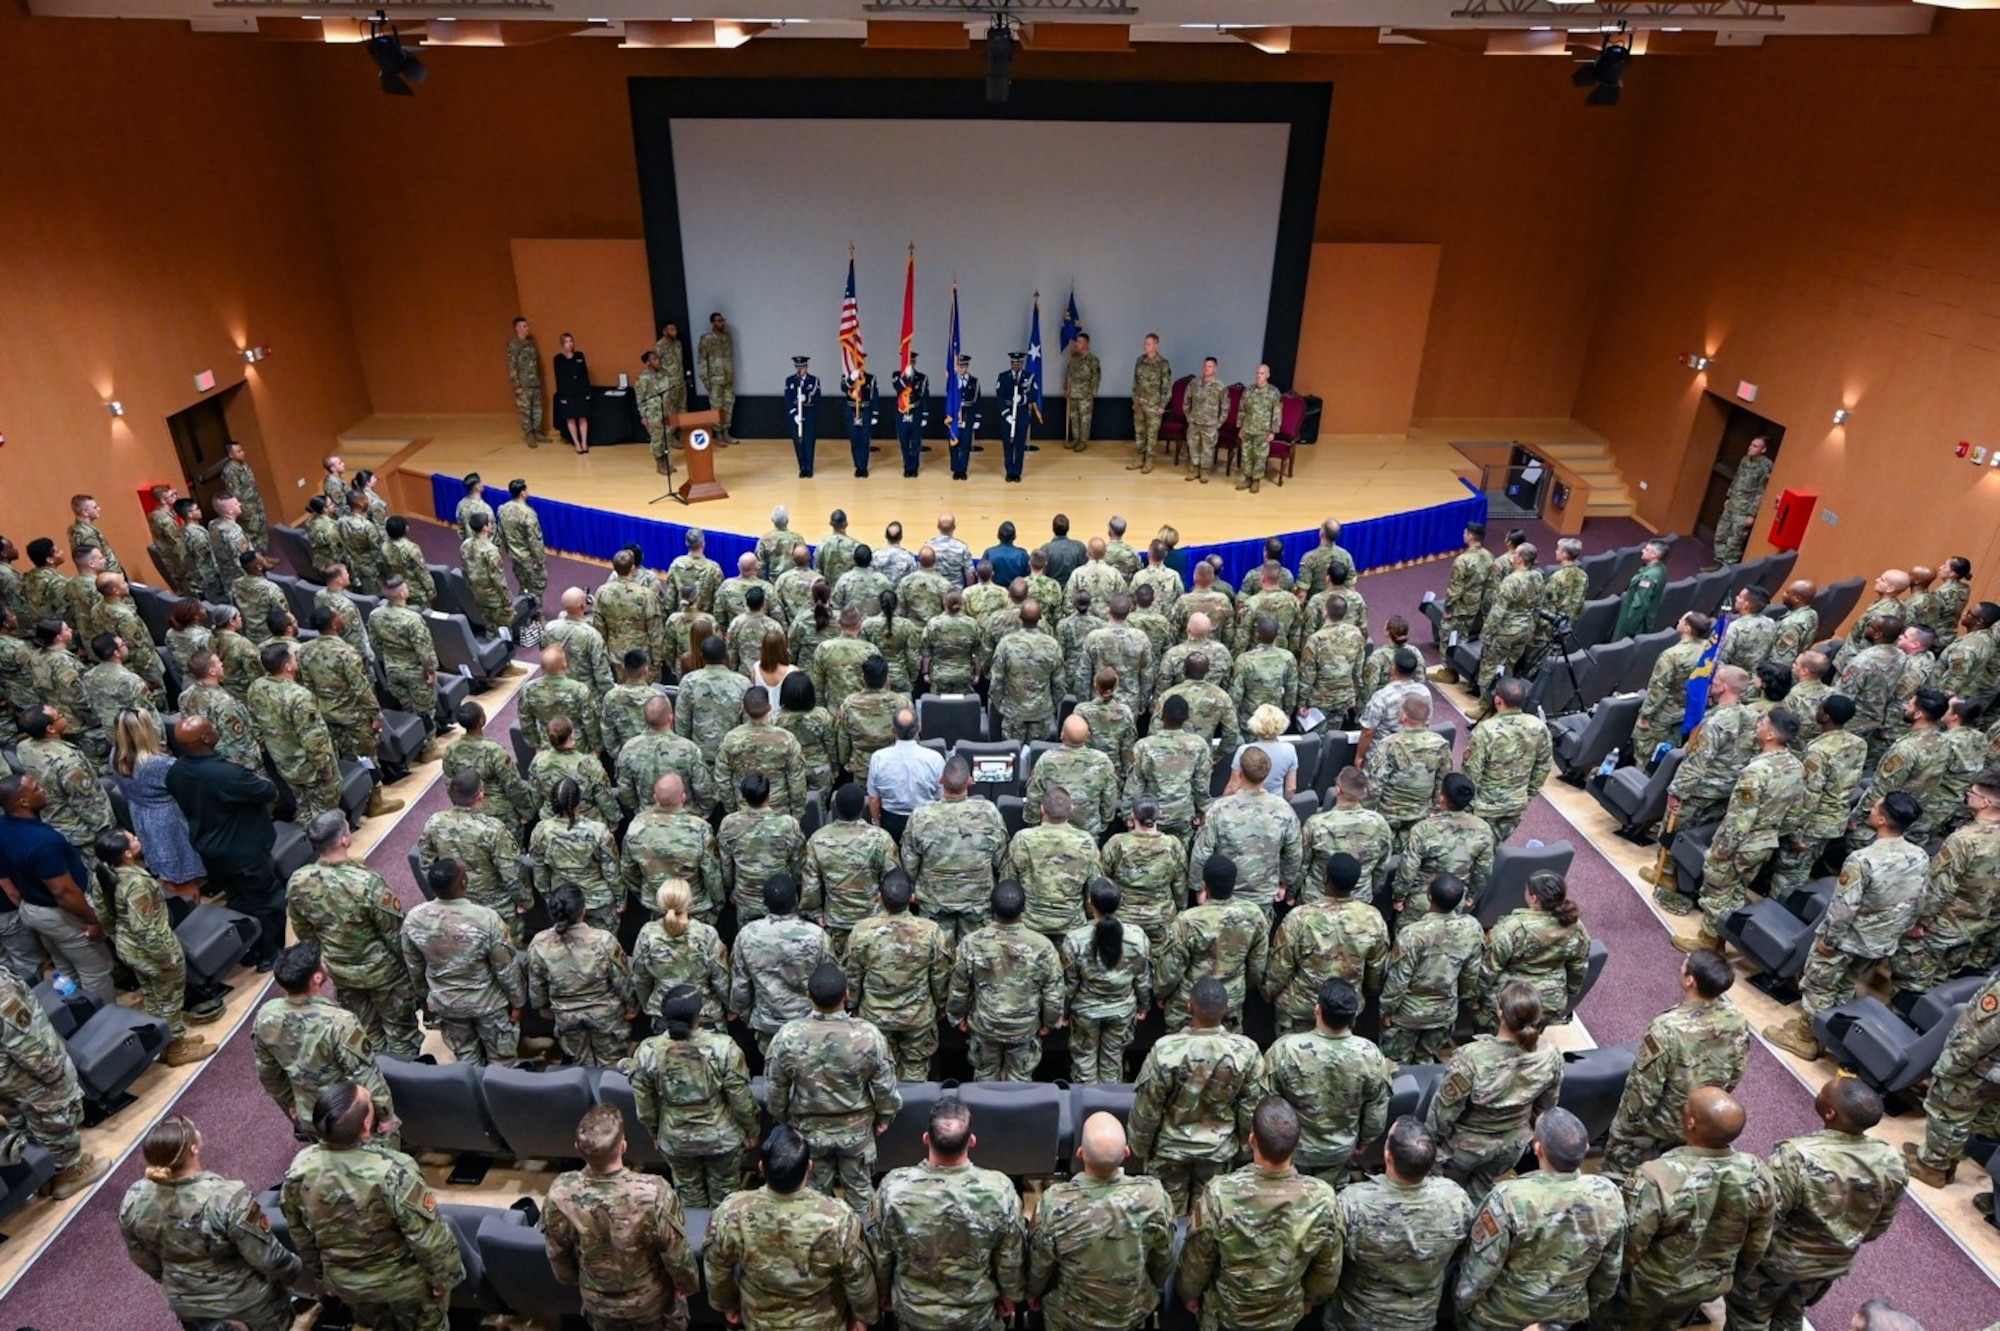 Personnel assigned to Incirlik Air Base attend a change of command ceremony at Incirlik AB, Turkey, June 30, 2022. During the ceremony, Col. Jason Gingrich relinquished command of the 39th ABW to Maj. Gen. Derek France, Third Air Force commander, who then charged Powell with leading the wing. The 39th ABW is charged with defending NATO’s southern flank under the auspices of 3rd AF, U.S. Air Forces in Europe – Air Forces Africa and U.S. European Command. The wing projects global power through strategic deterrence, agile combat support and enduring partnerships to defend U.S. interests and allies. (U.S. Air Force photo Staff Sgt. Gabrielle Winn)